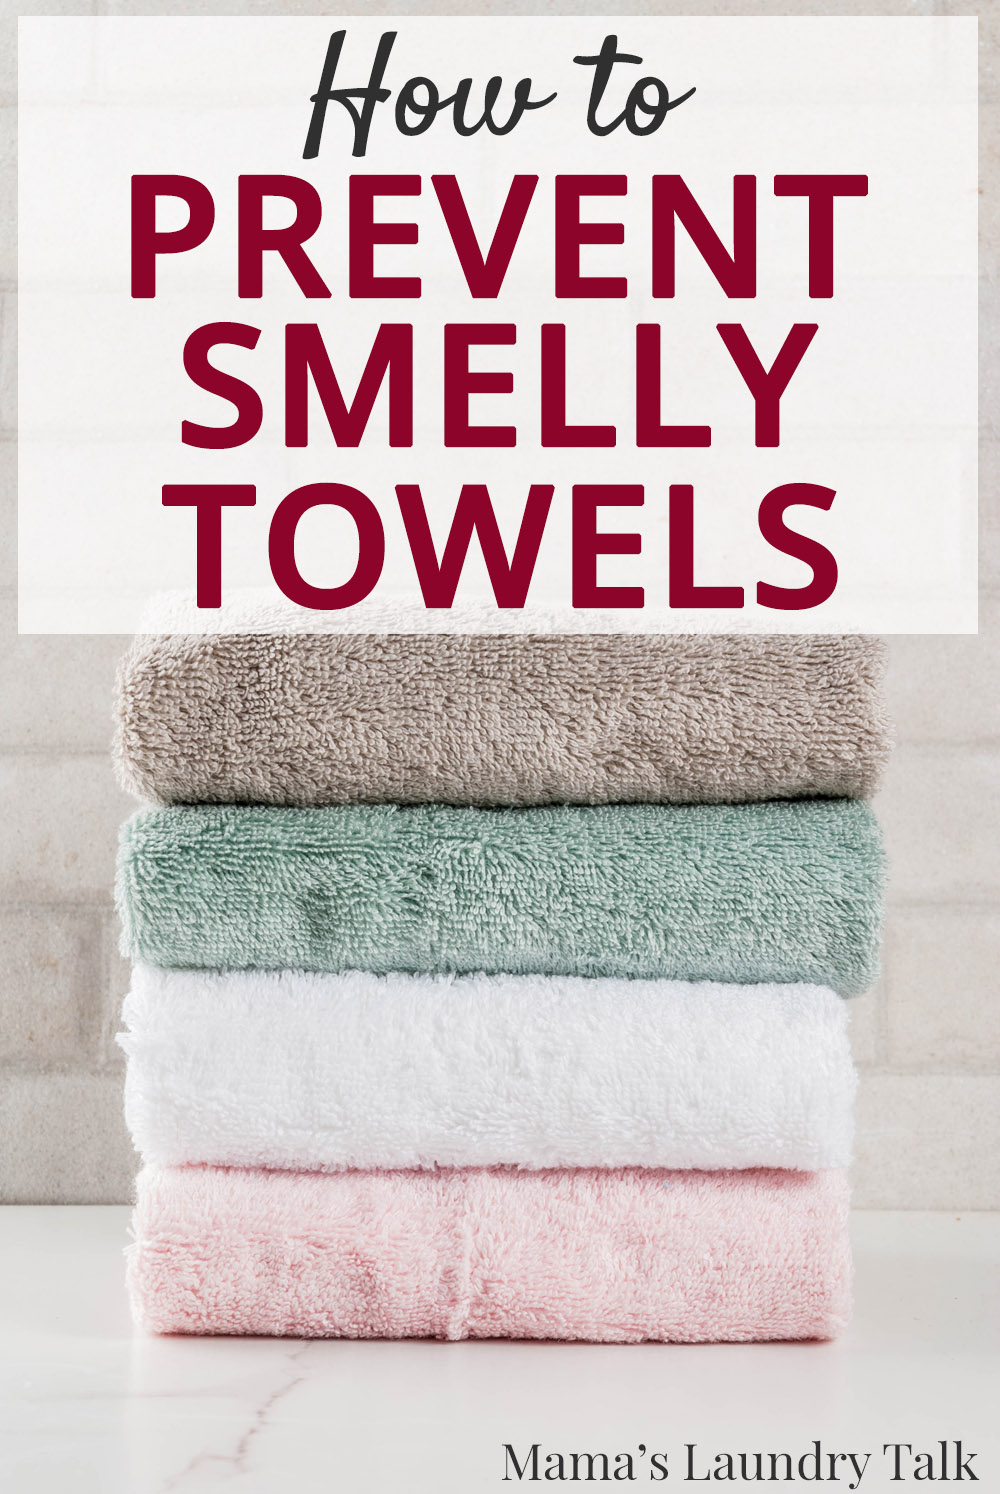 How to Properly Wash Microfiber Towels? Say Goodbye to Smelly Towels! –  Mizu Towel